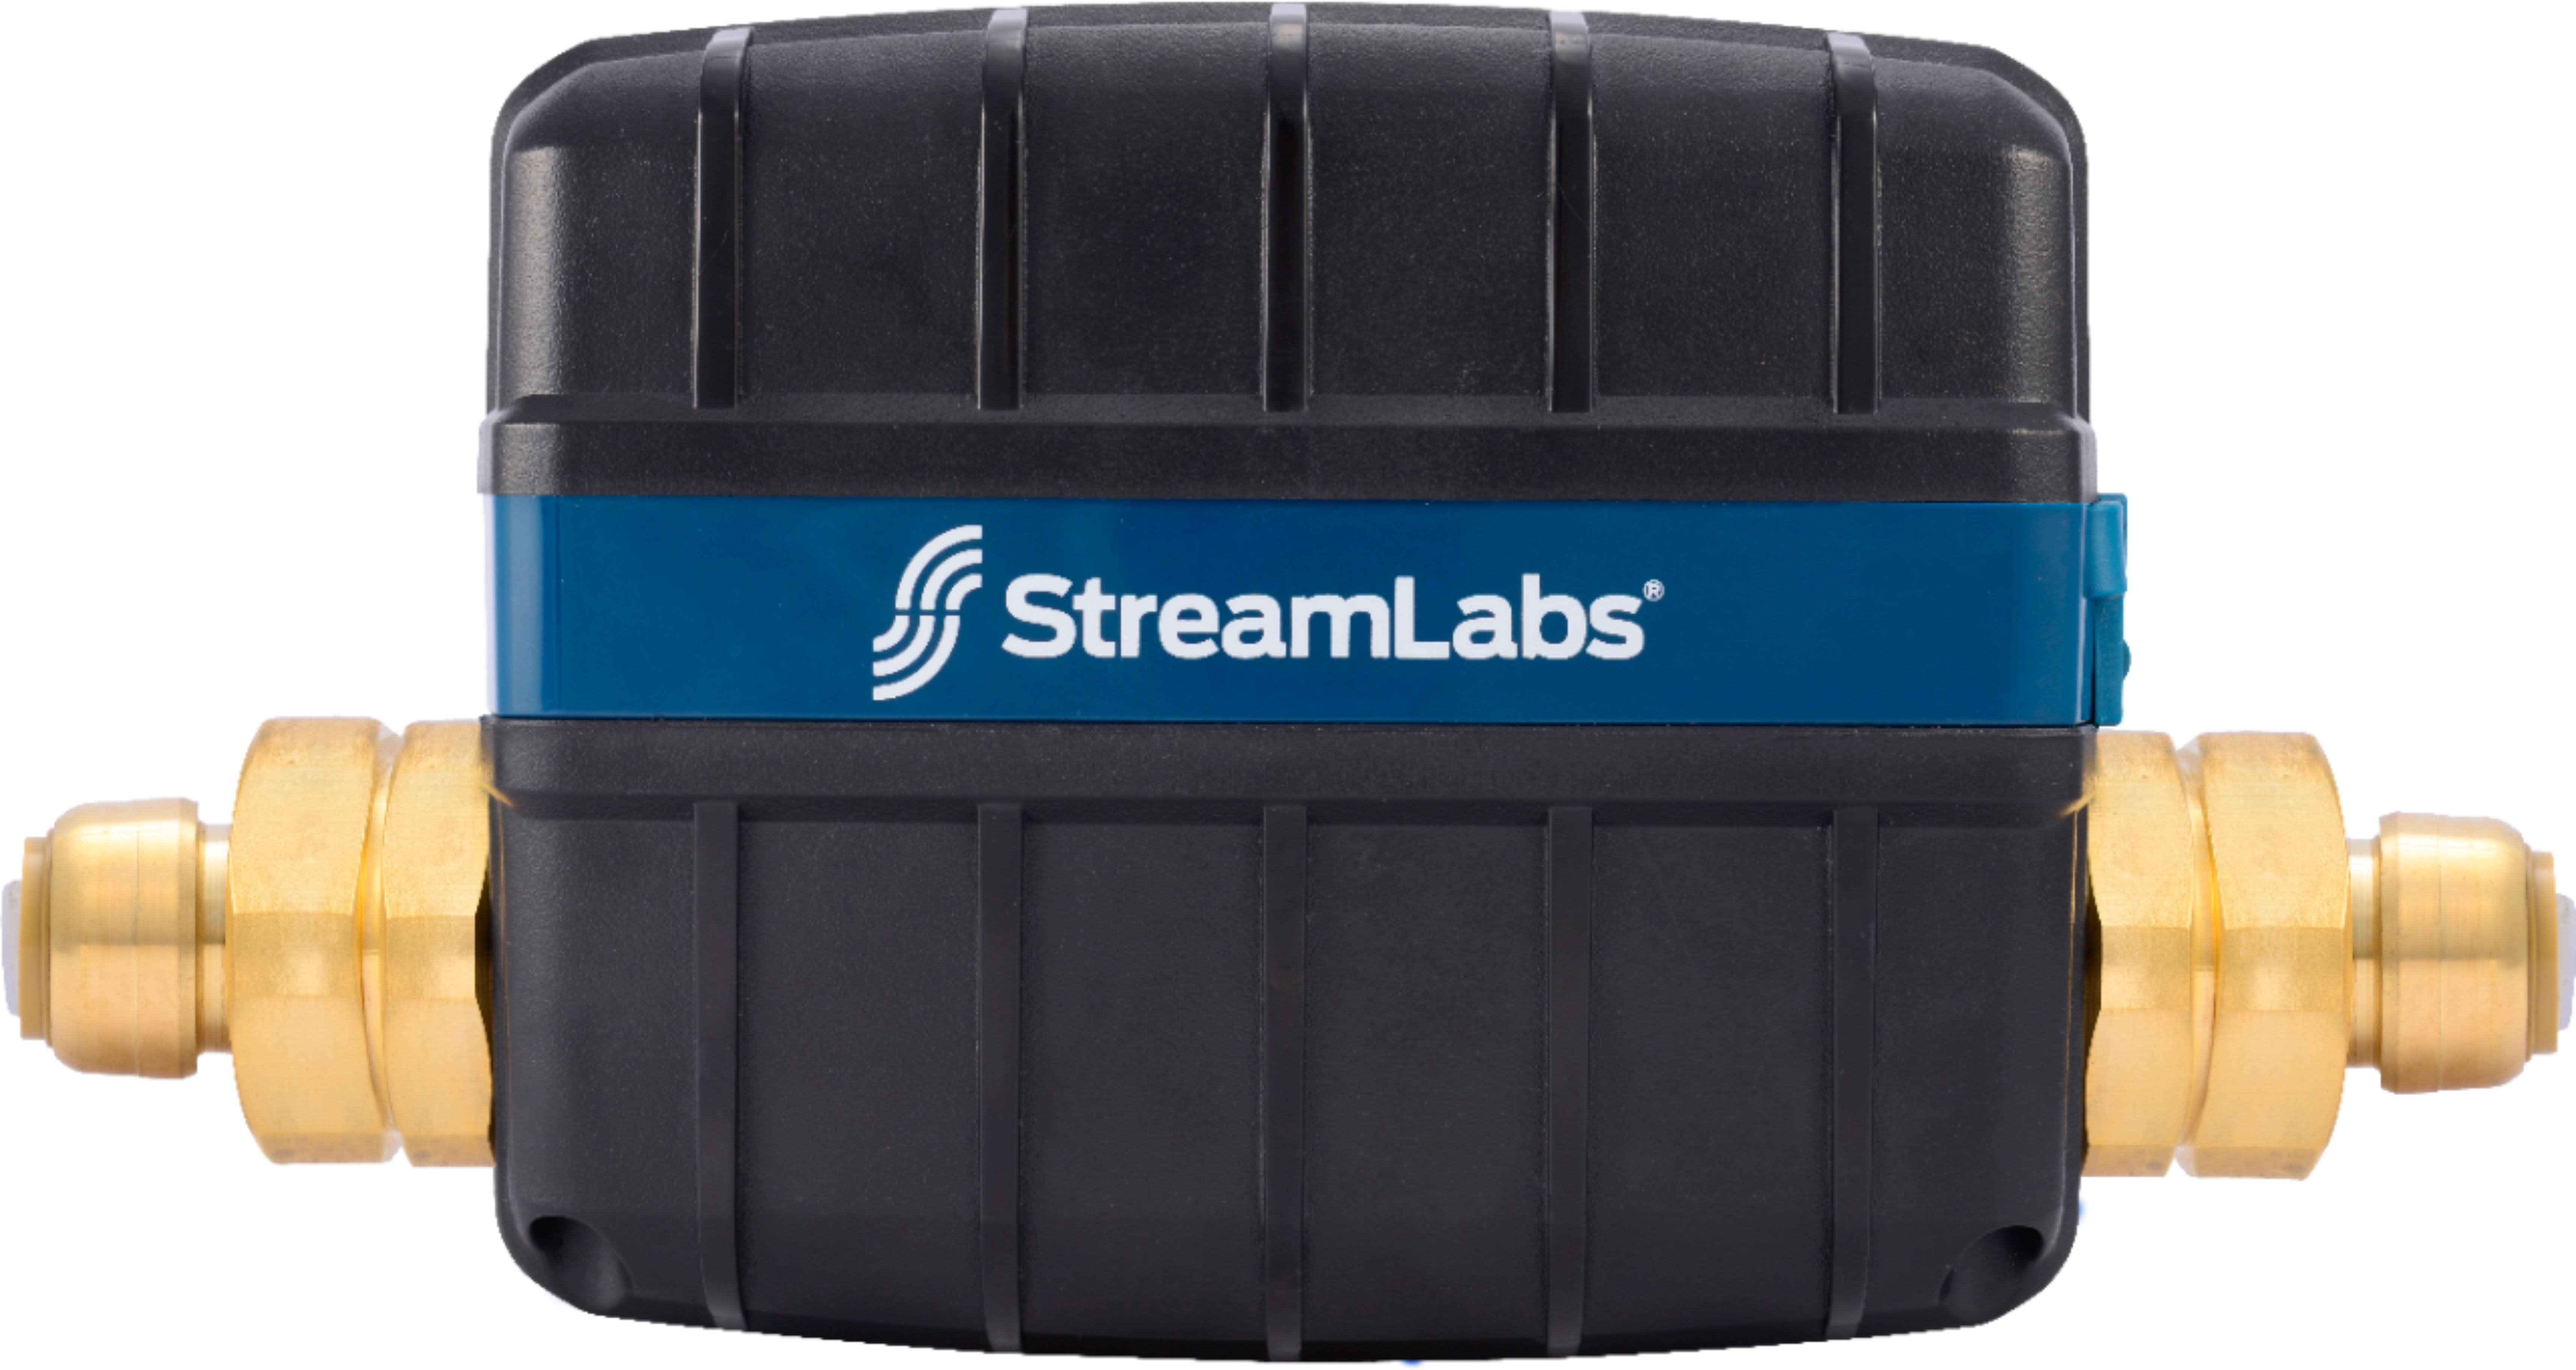 StreamLabs Control – StreamLabsWater